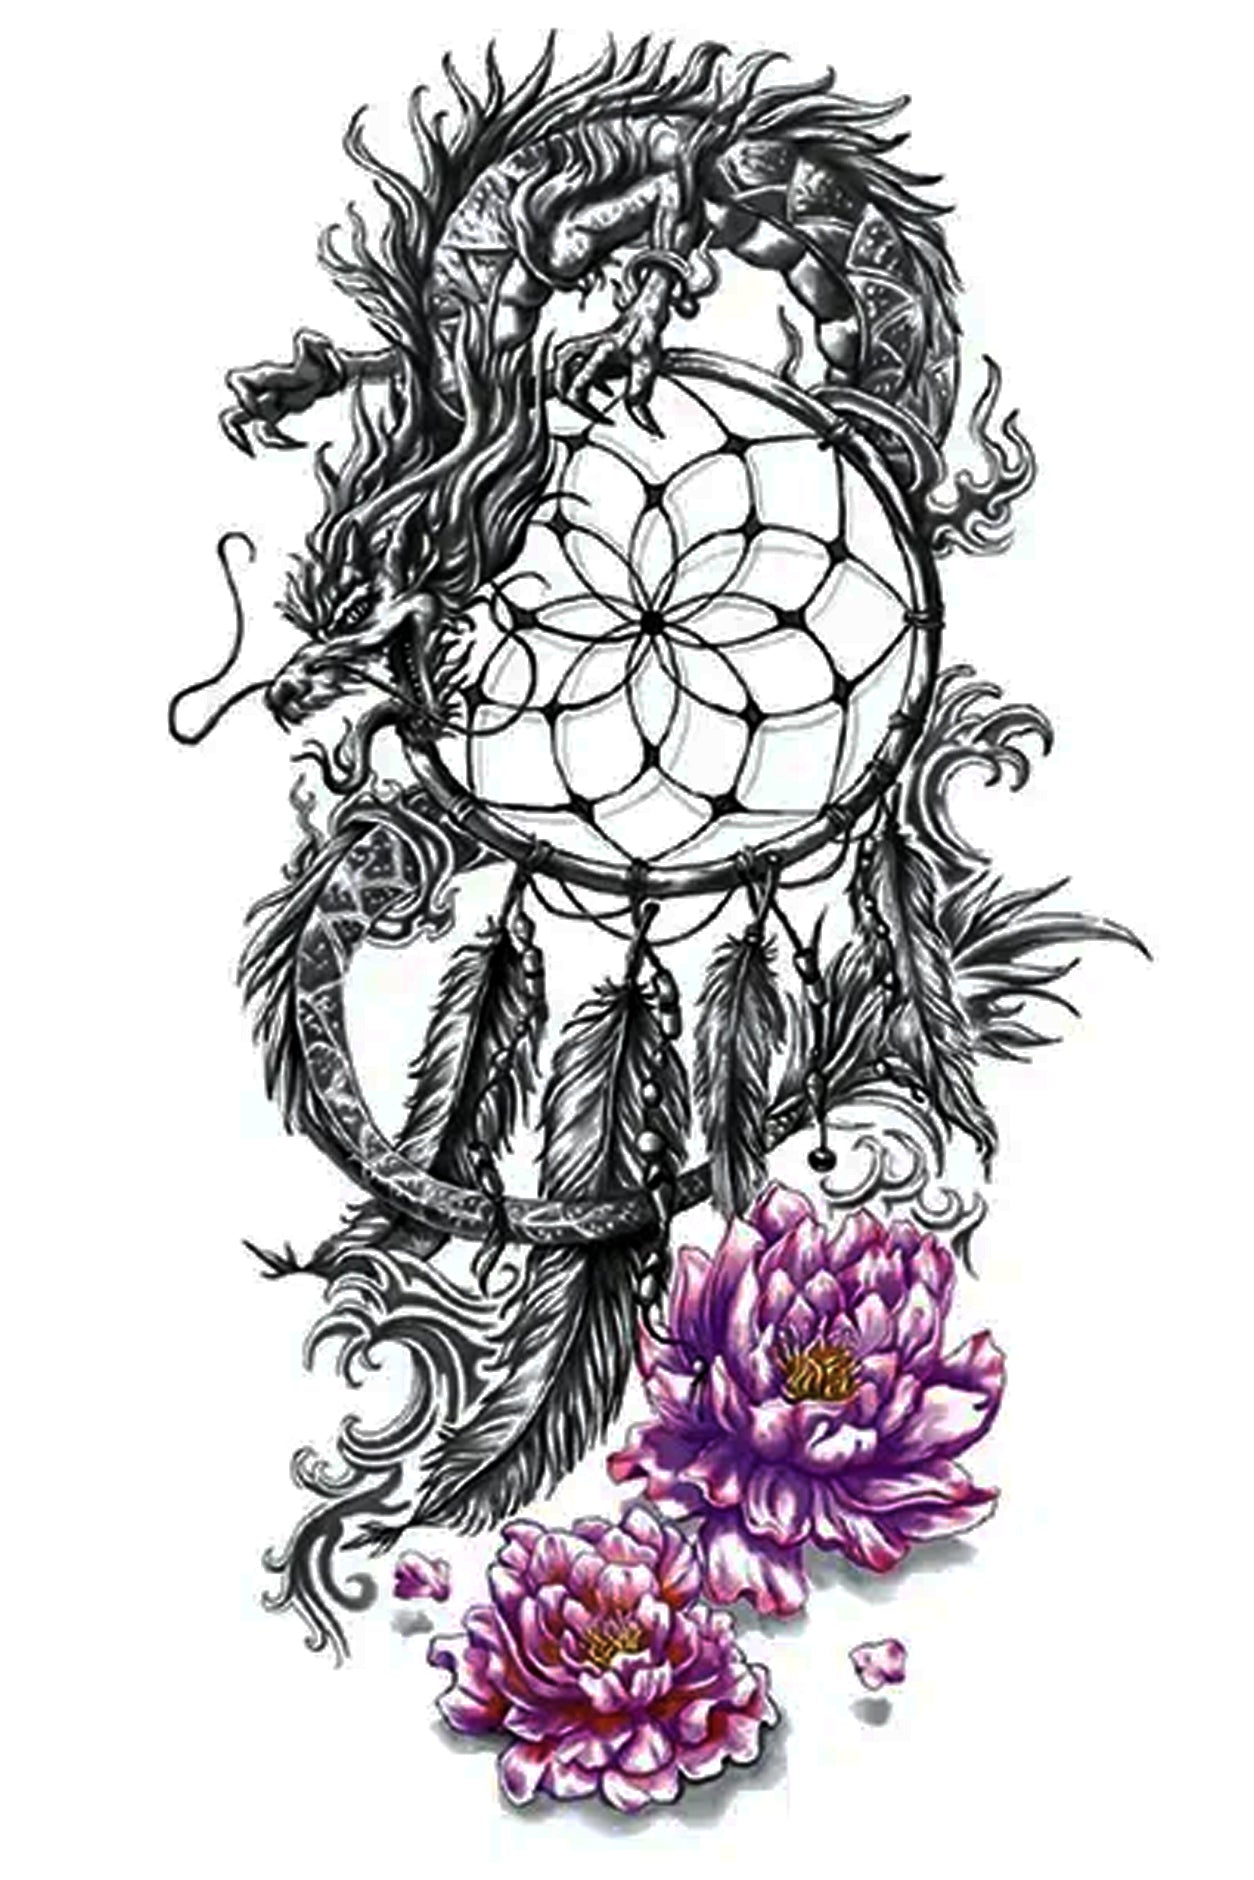 Imagine having a magical dragon guard your dreams. Dreamcatchers filter out all bad dreams and only allow good thoughts into our minds. That's why this dragon hangs close to the Dreamcatcher. Dragons are immensely positive mystical creatures. The only color in this temporary tattoo is the two lavender mums that symbolize care.  Creatively wear this artwork on any part of your body, arm, leg, torso, or shoulder.